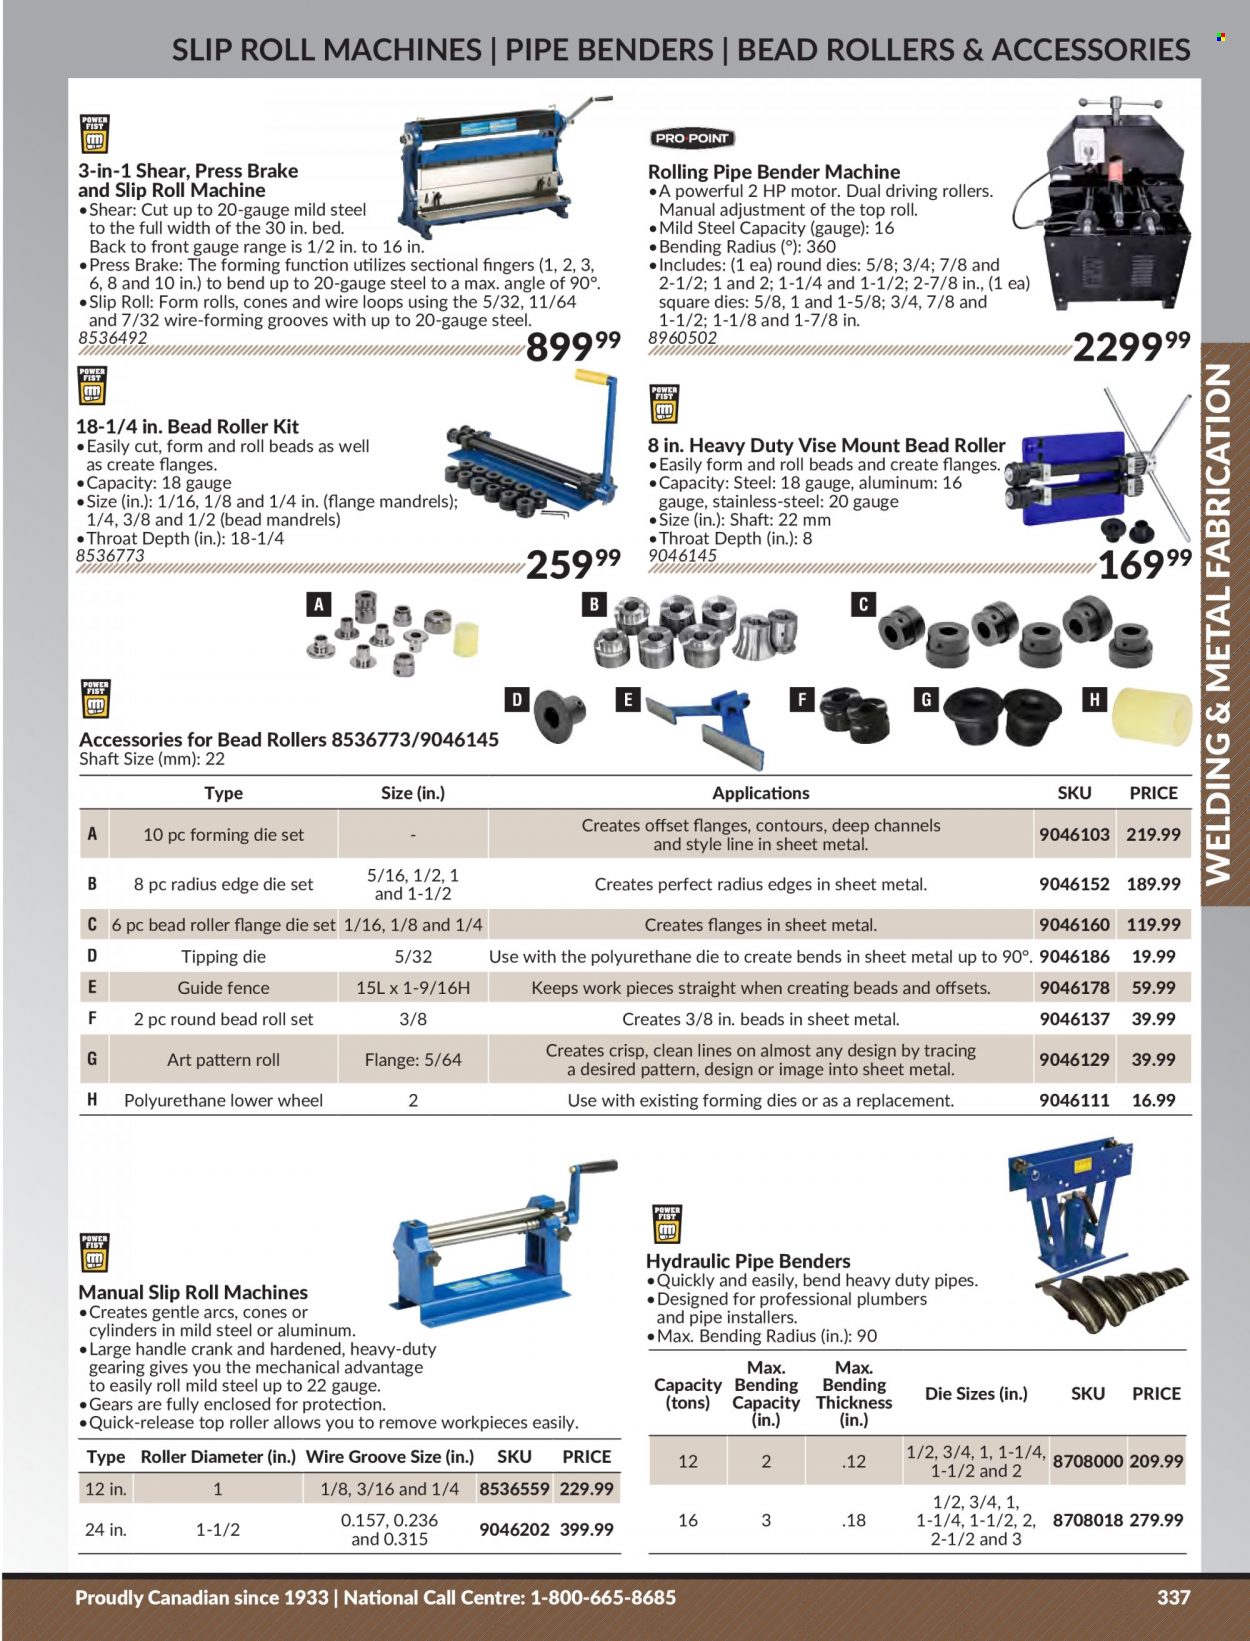 Princess Auto Flyer - Sales products - roller. Page 345.